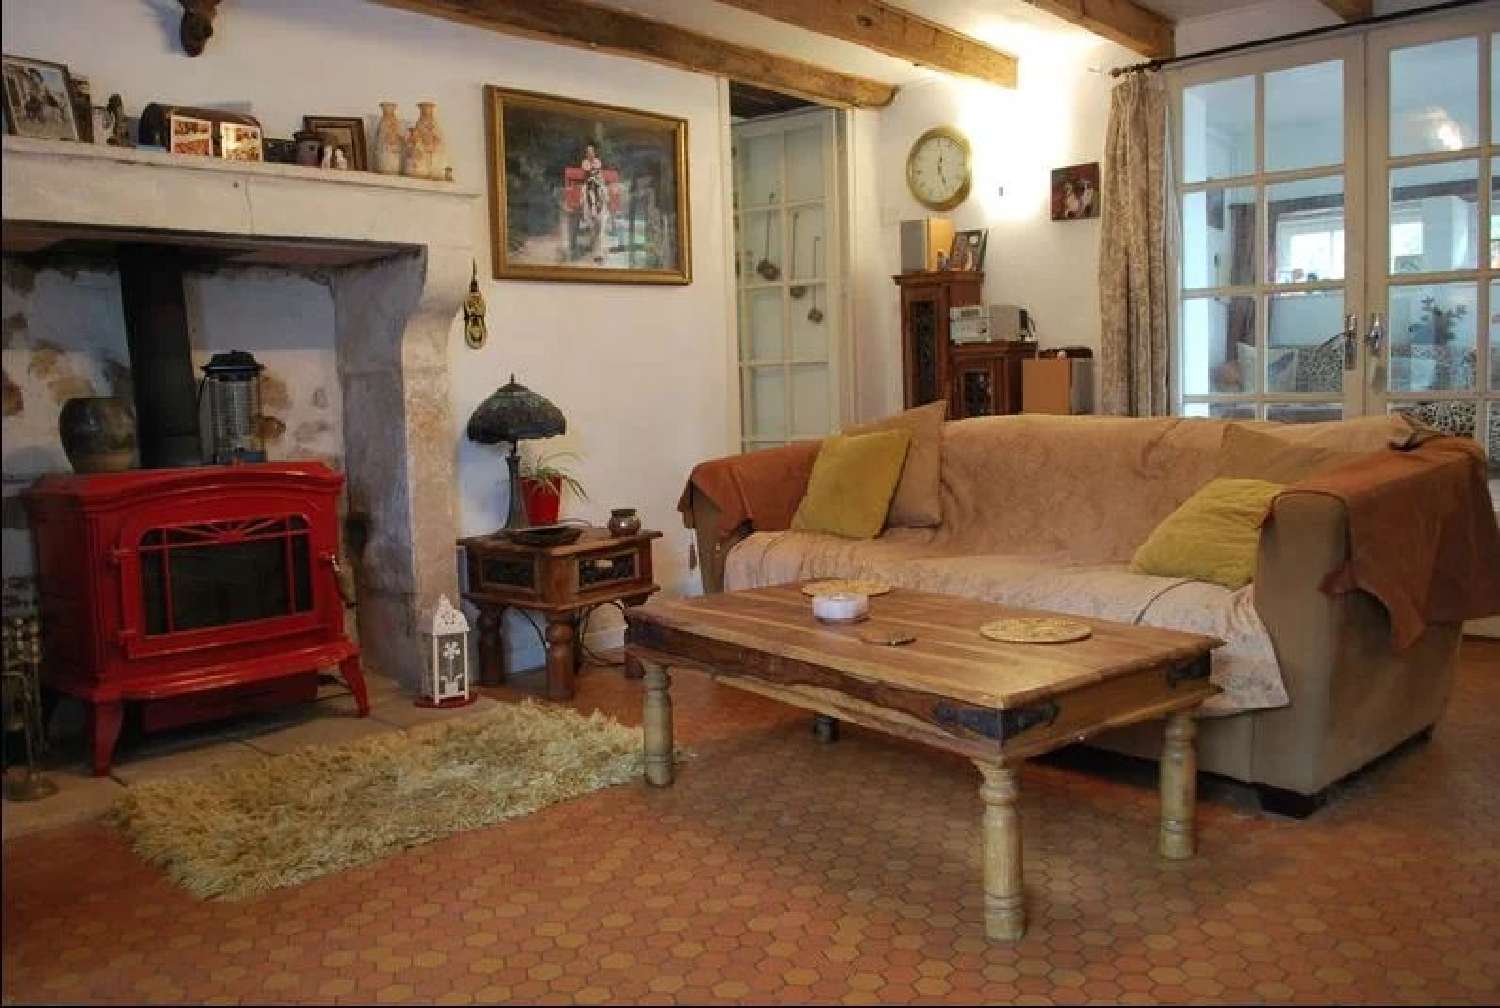  for sale bed and breakfast Saulgé Vienne 6